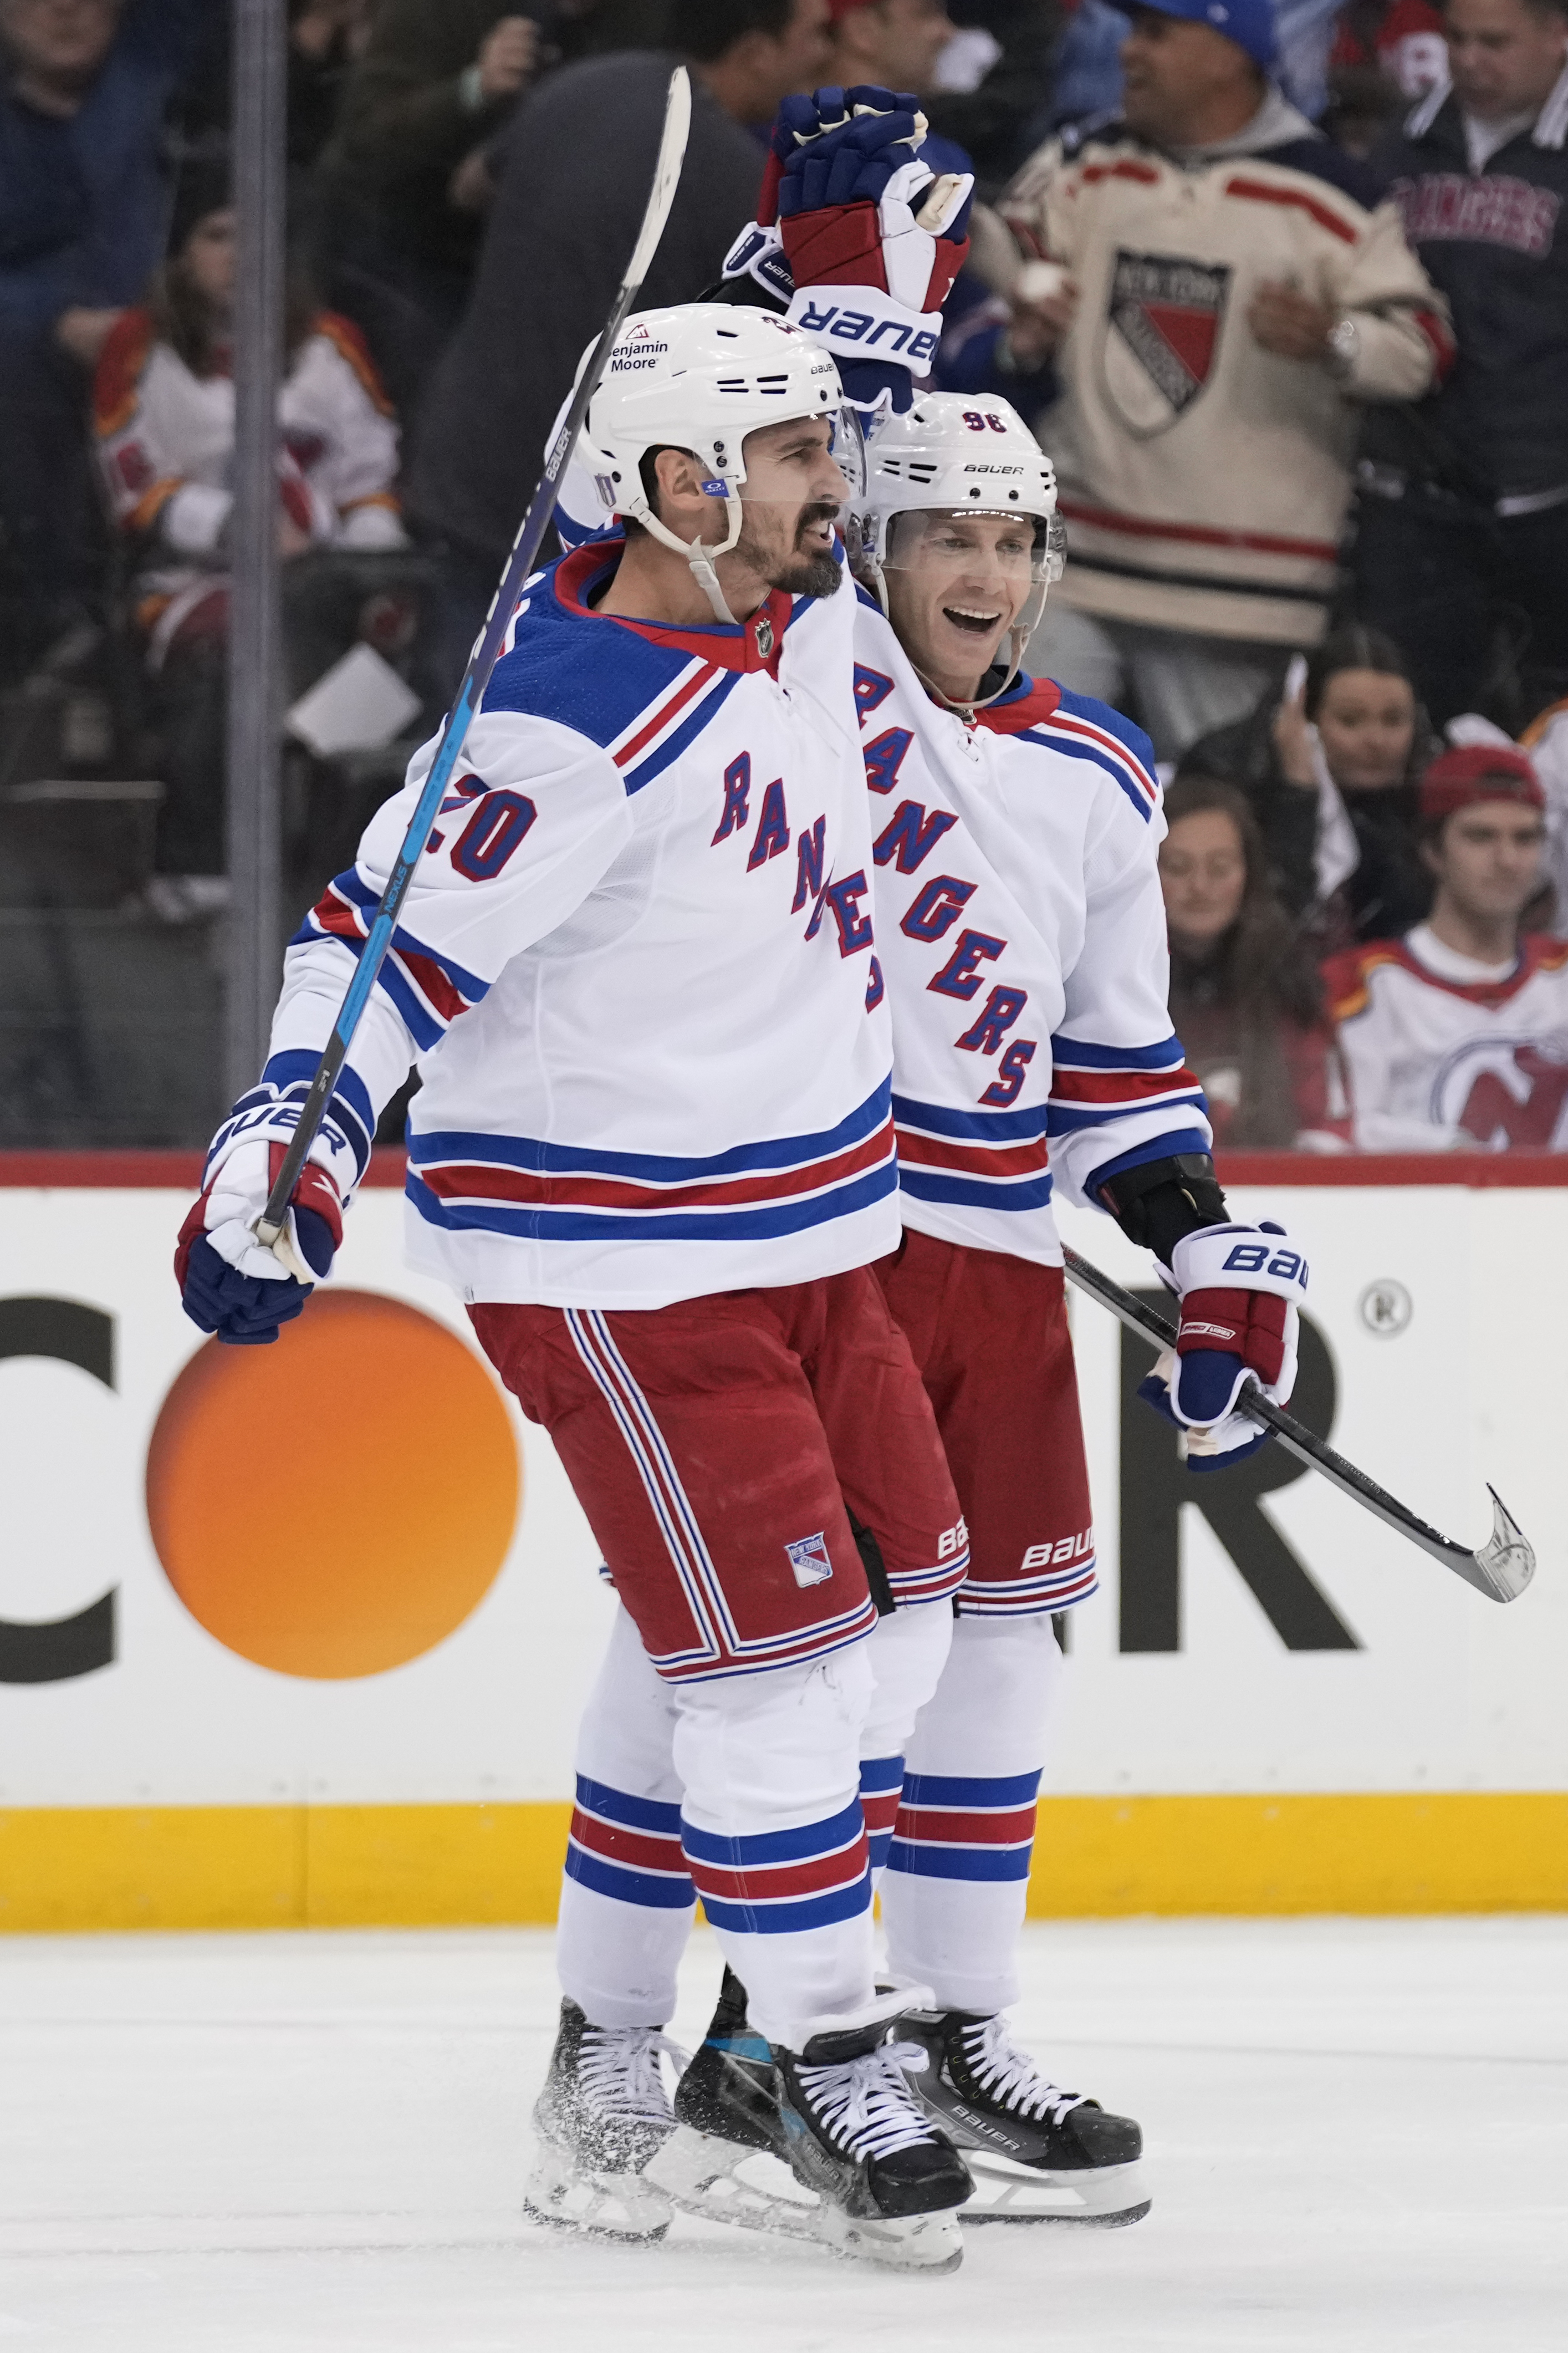 2012 NHL Playoffs: Chris Kreider Makes NHL Debut in Game 3 with